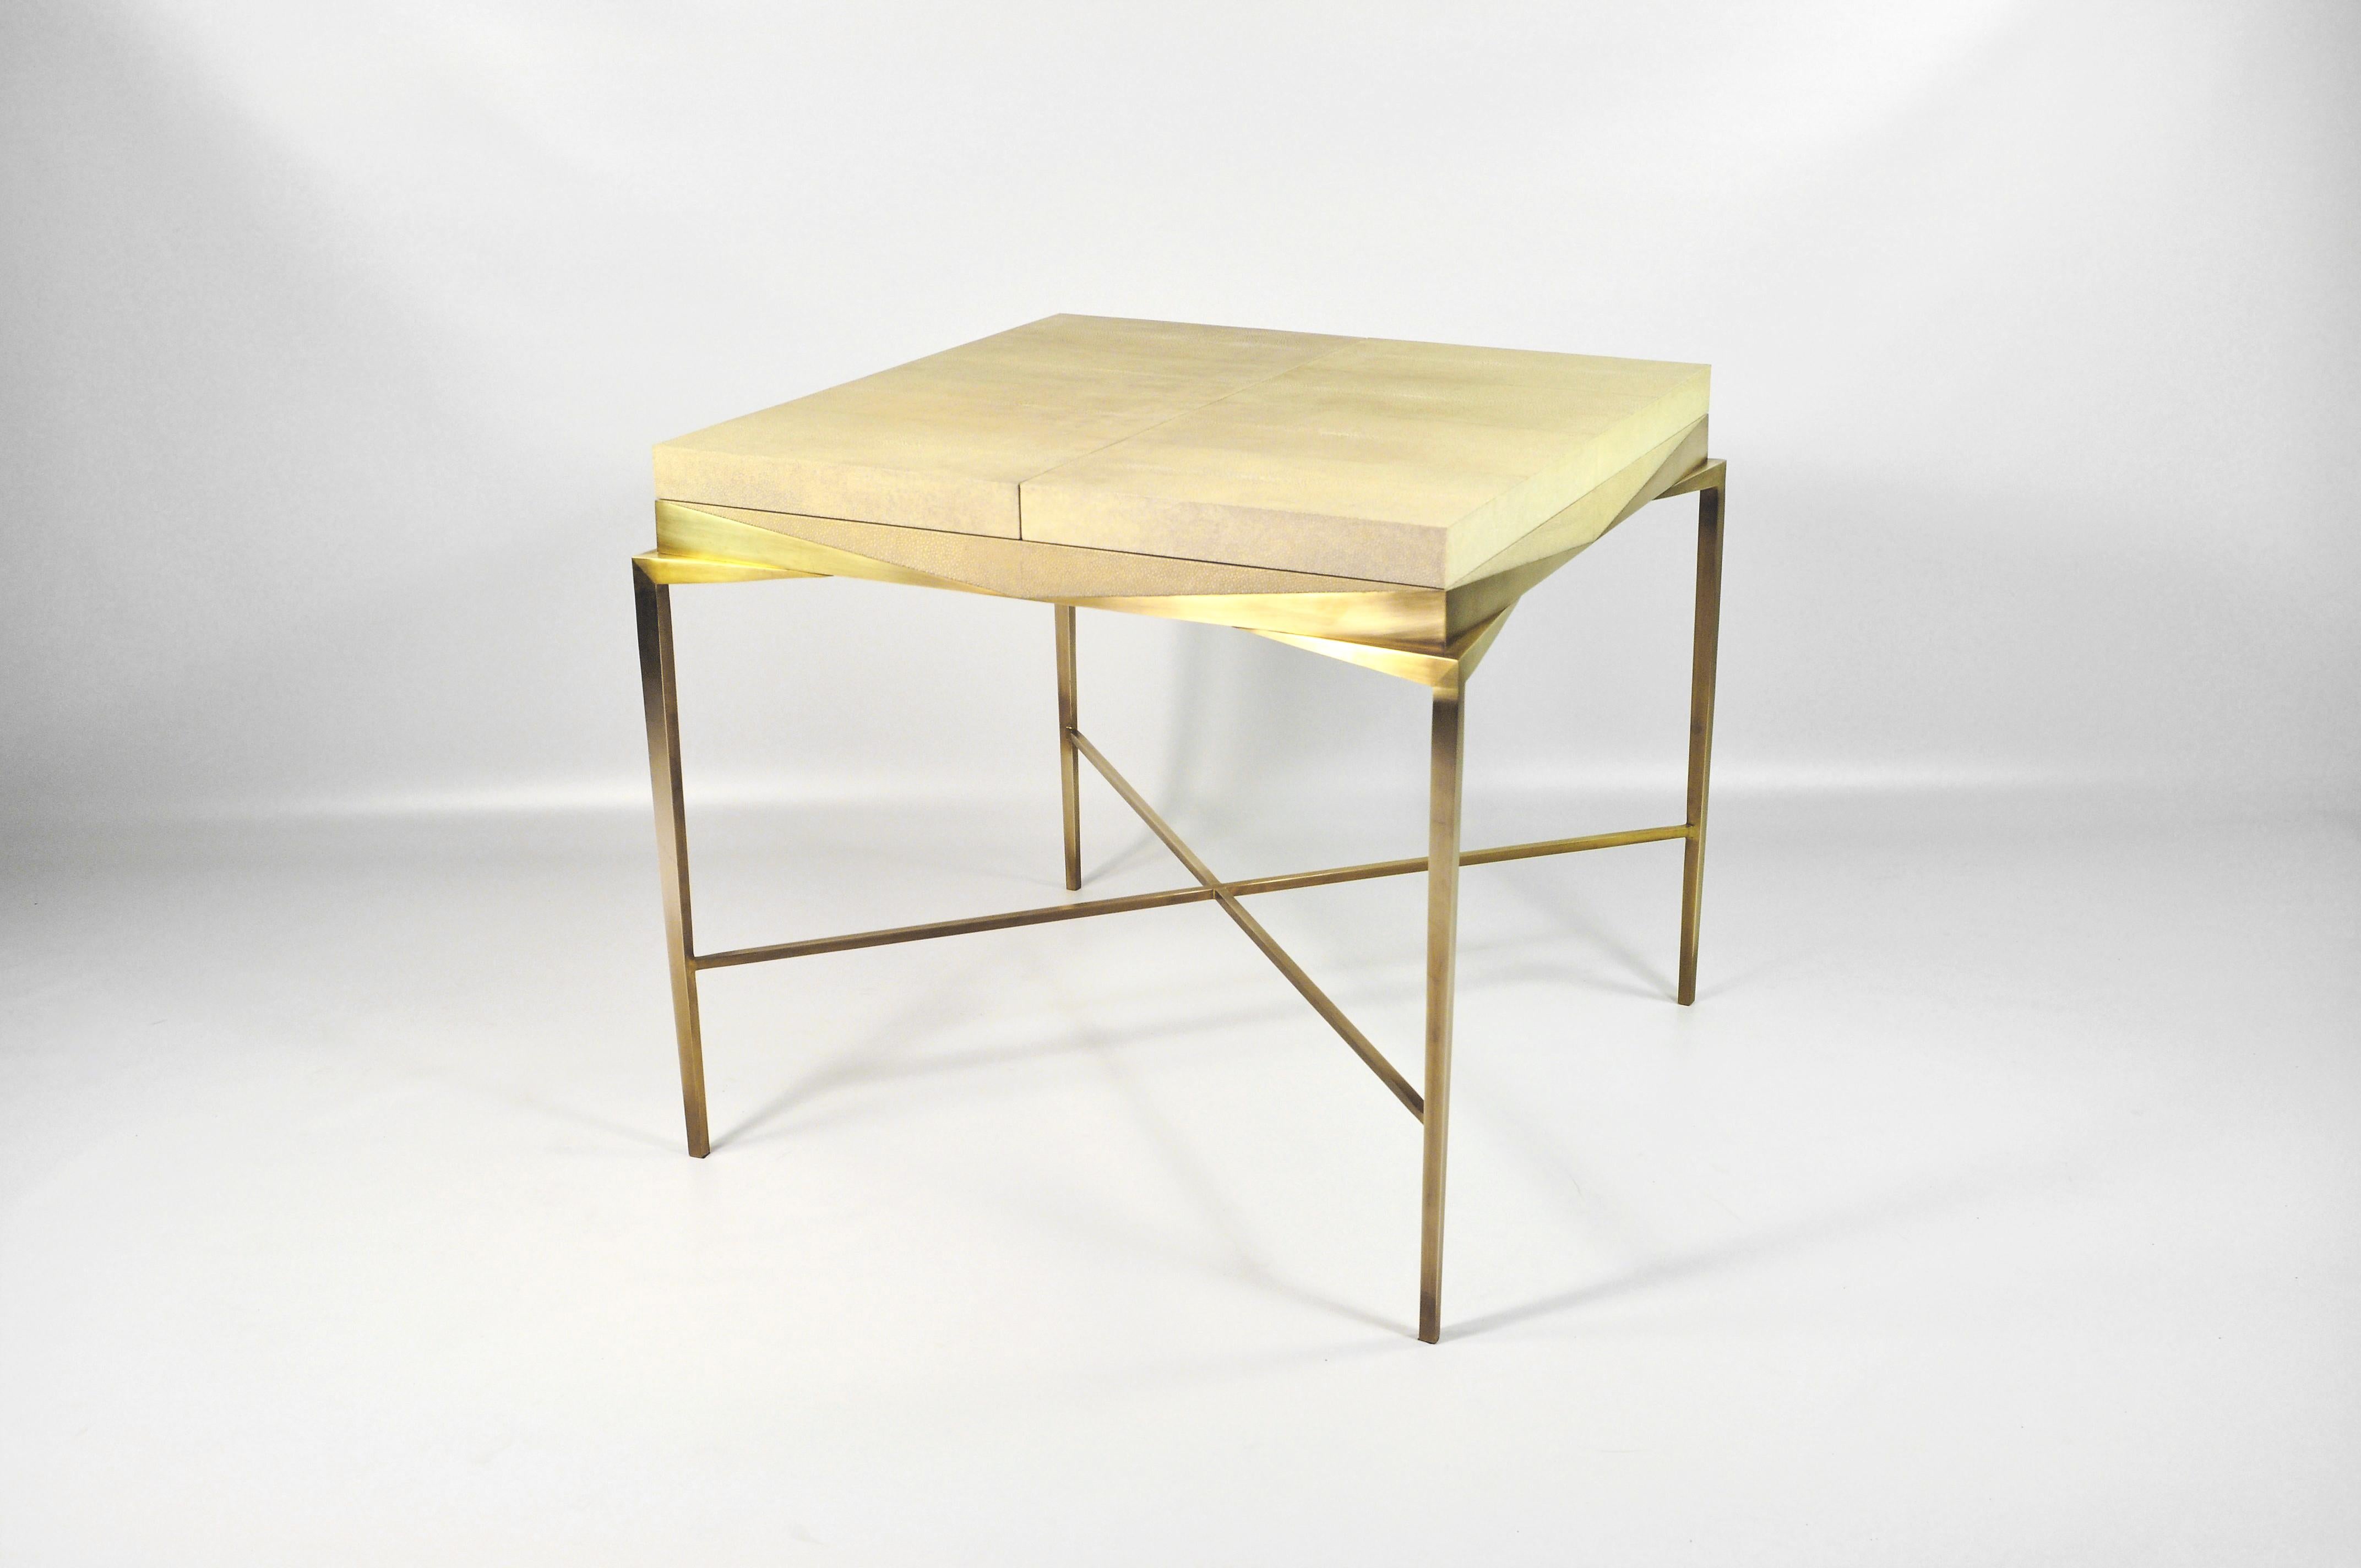 This square table is made for gamers.
It has a sliding top. When it's closed your can play cards and when it's opened you can play backgammon.
The top is made of shagreen, wood and brass. The legs are made of brass.
This piece when it's closed hide